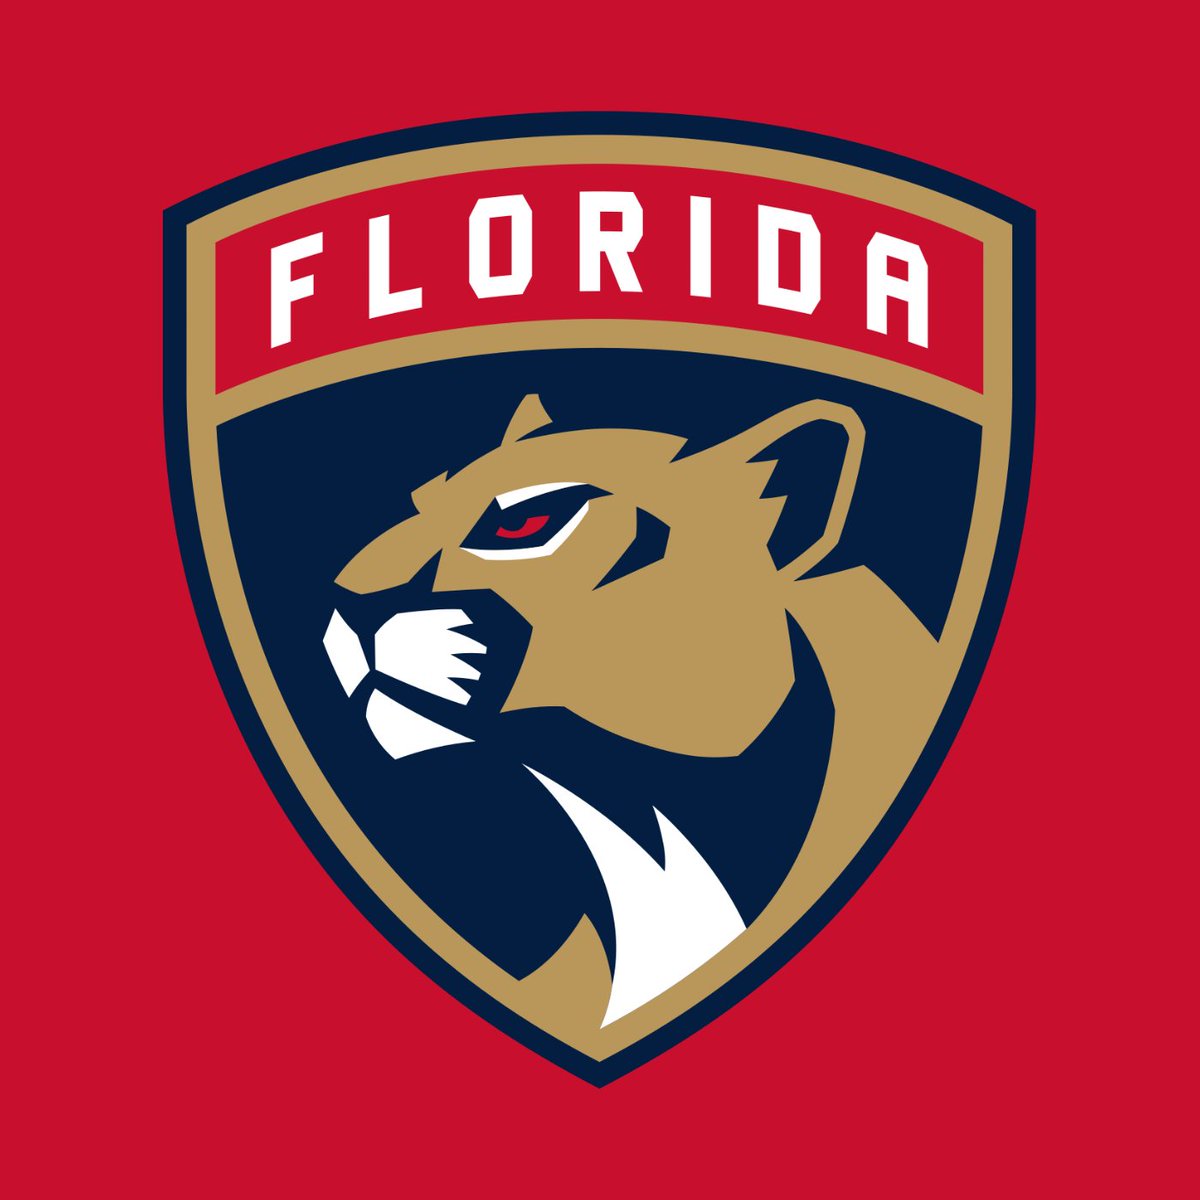 With the 194th overall selection in the NHL Draft, the Florida Panthers are proud to select: Fred Rechid. https://t.co/1n39DEzN70